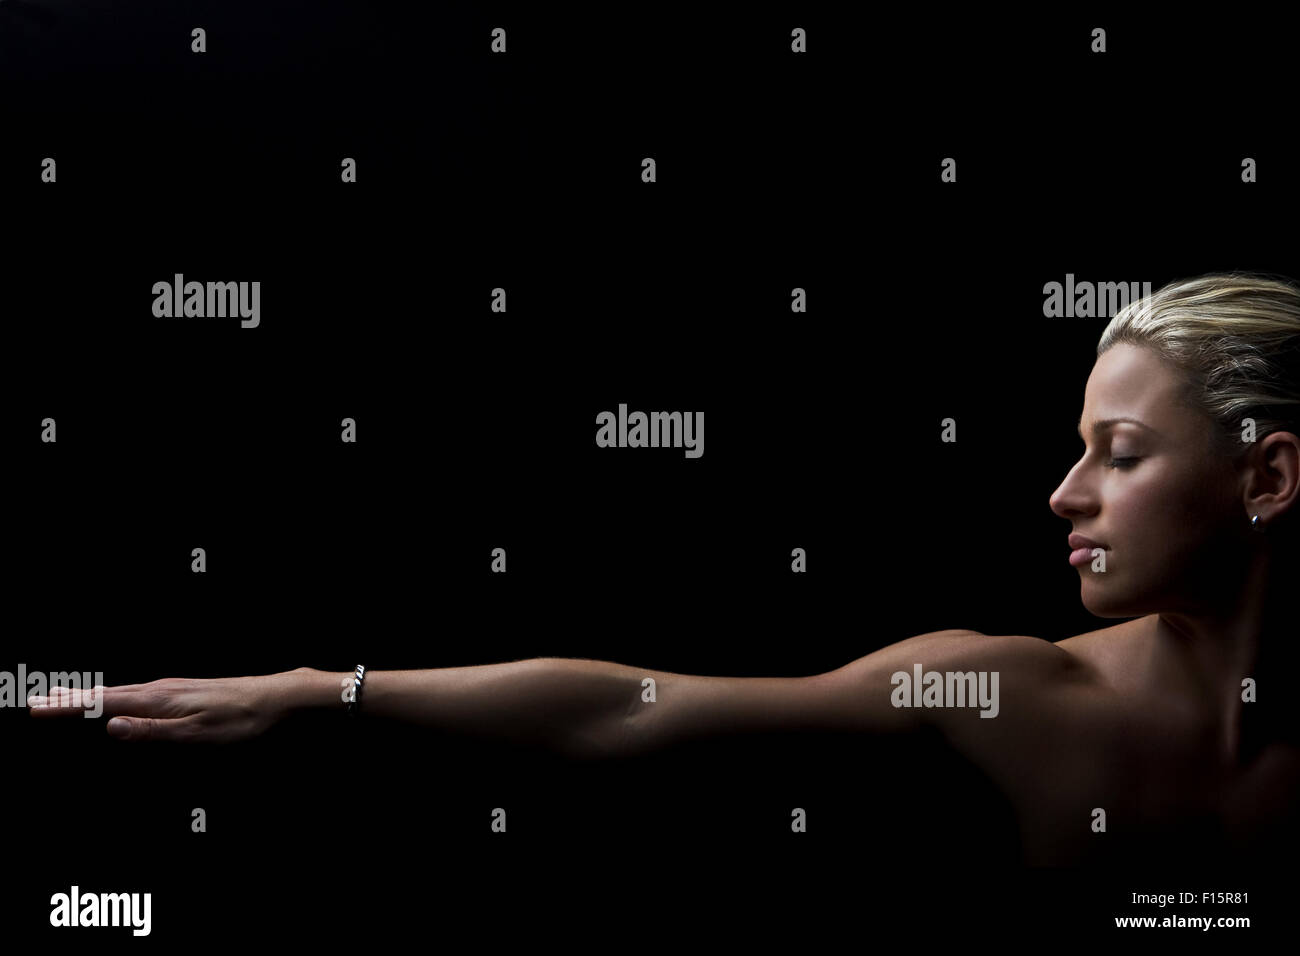 dramatic studio portrait of fit blonde female athlete eyes closed with one outstretched arm across bottom of all black frame Stock Photo